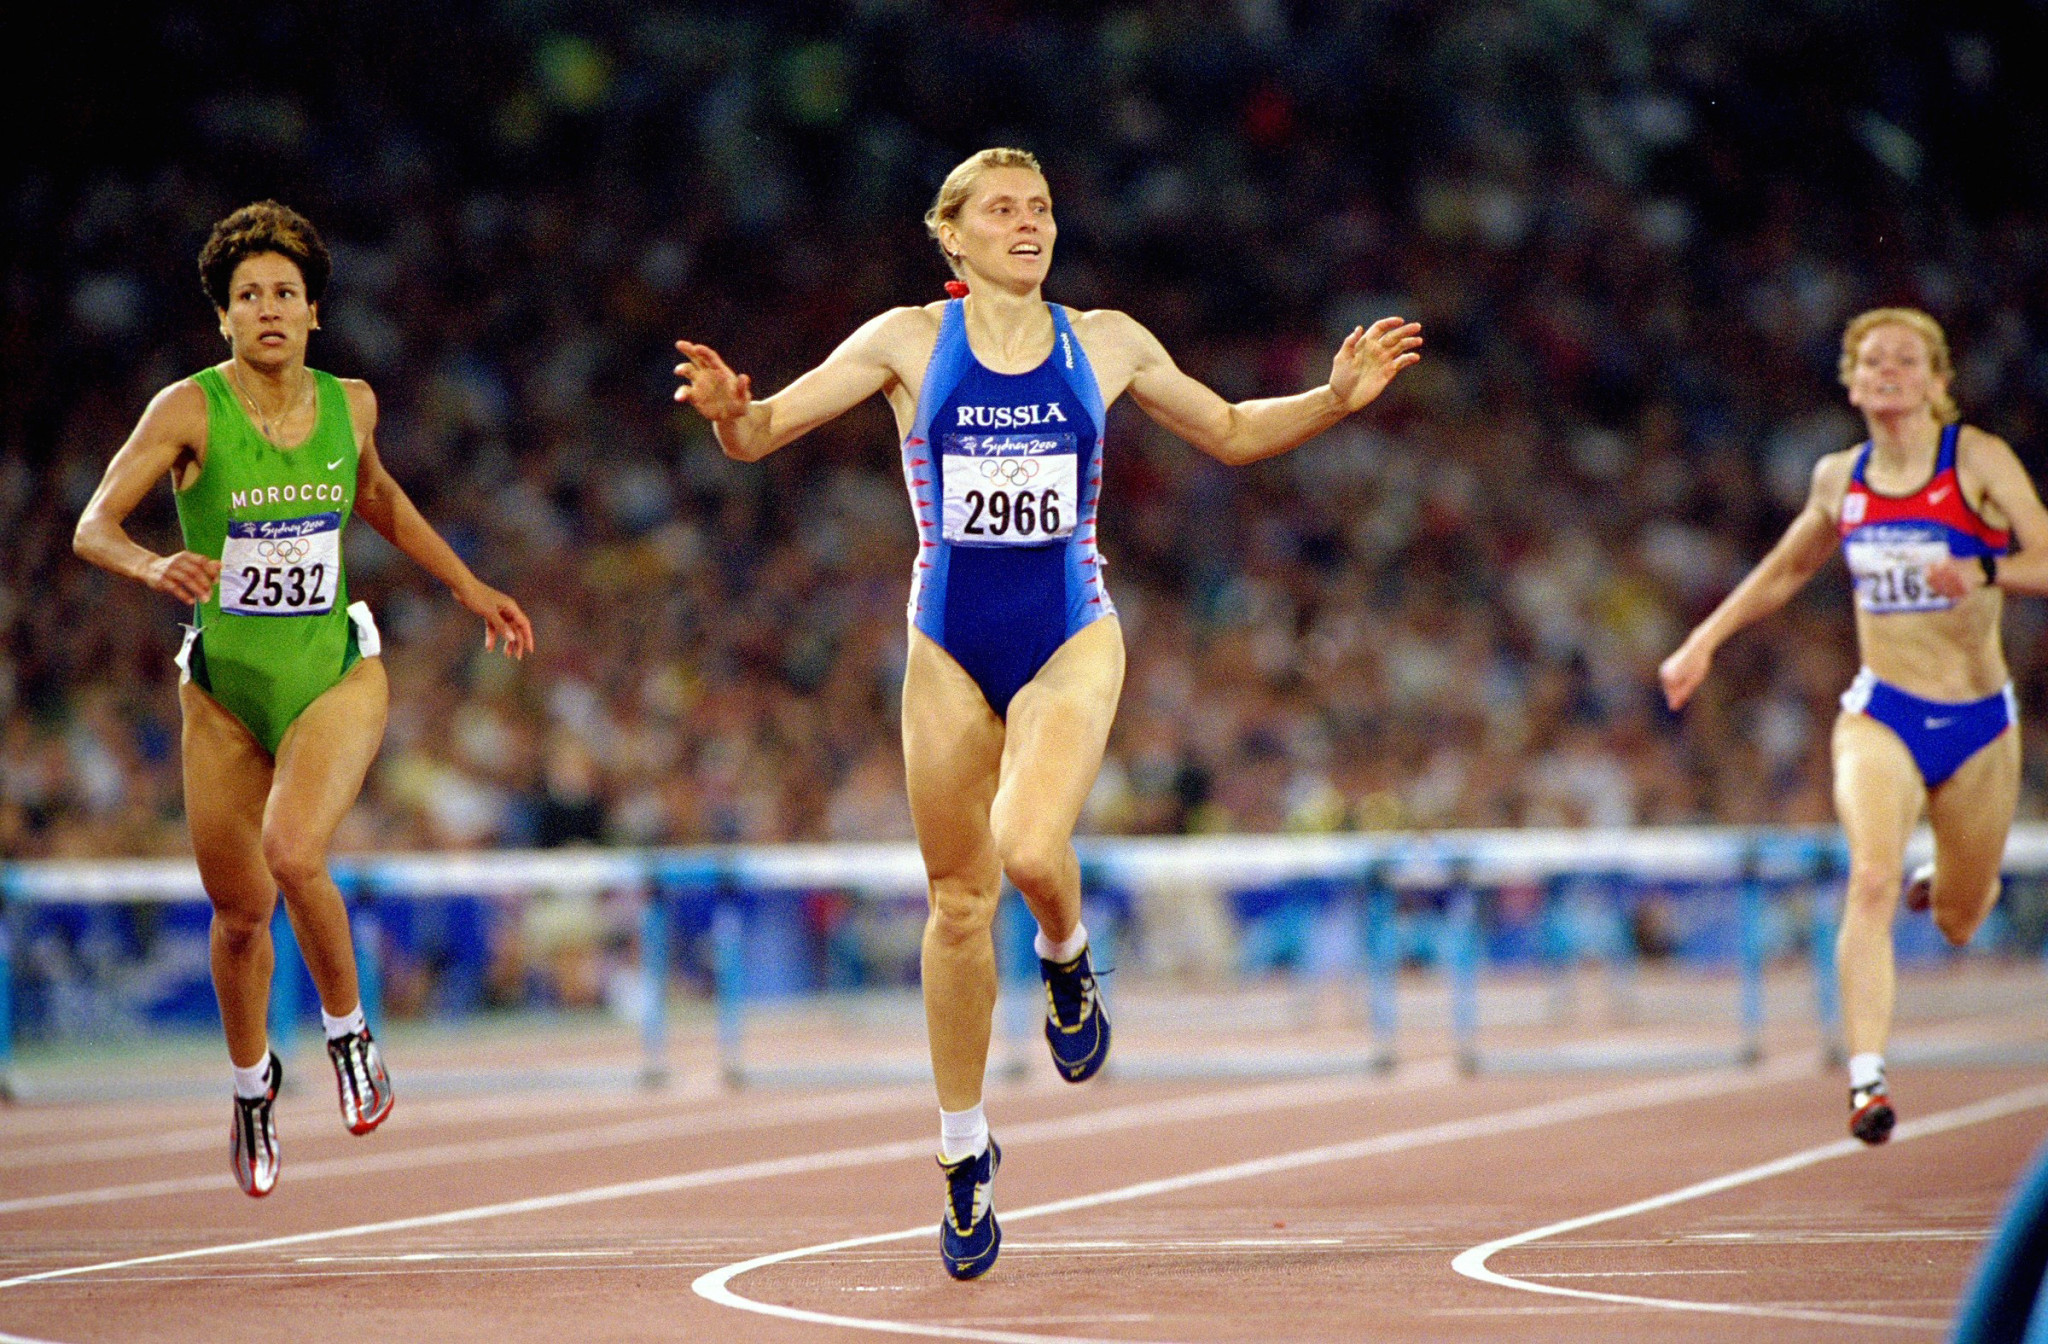 Sydney 2000 400m hurdles champion Irina Privalova is among the nominees for RusAF President ©Getty Images